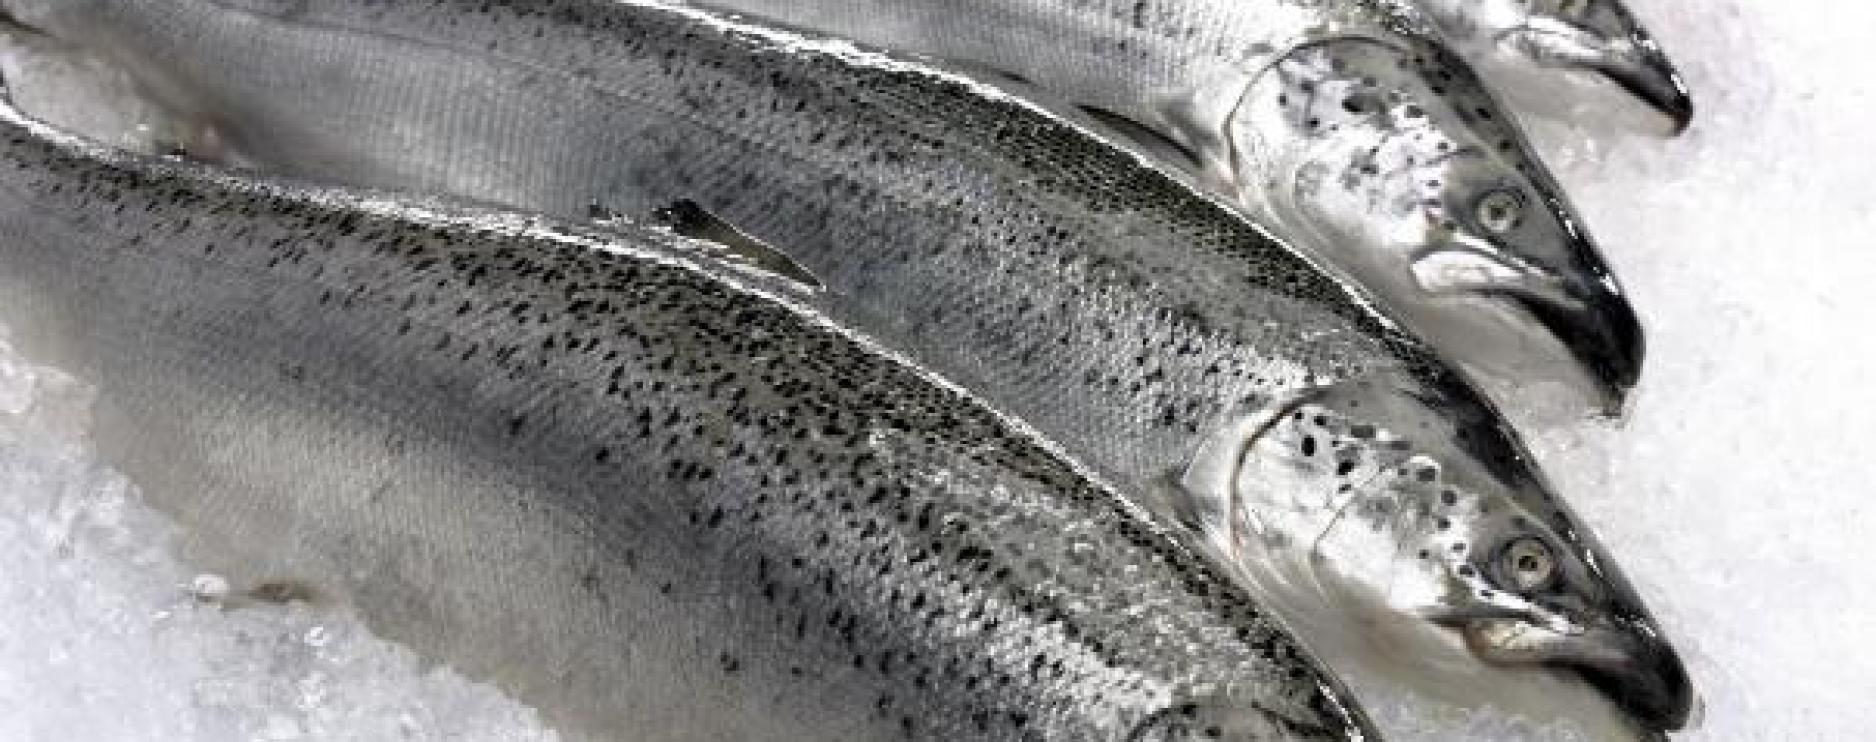 Swapping red meat for forage fish could save 750,000 lives